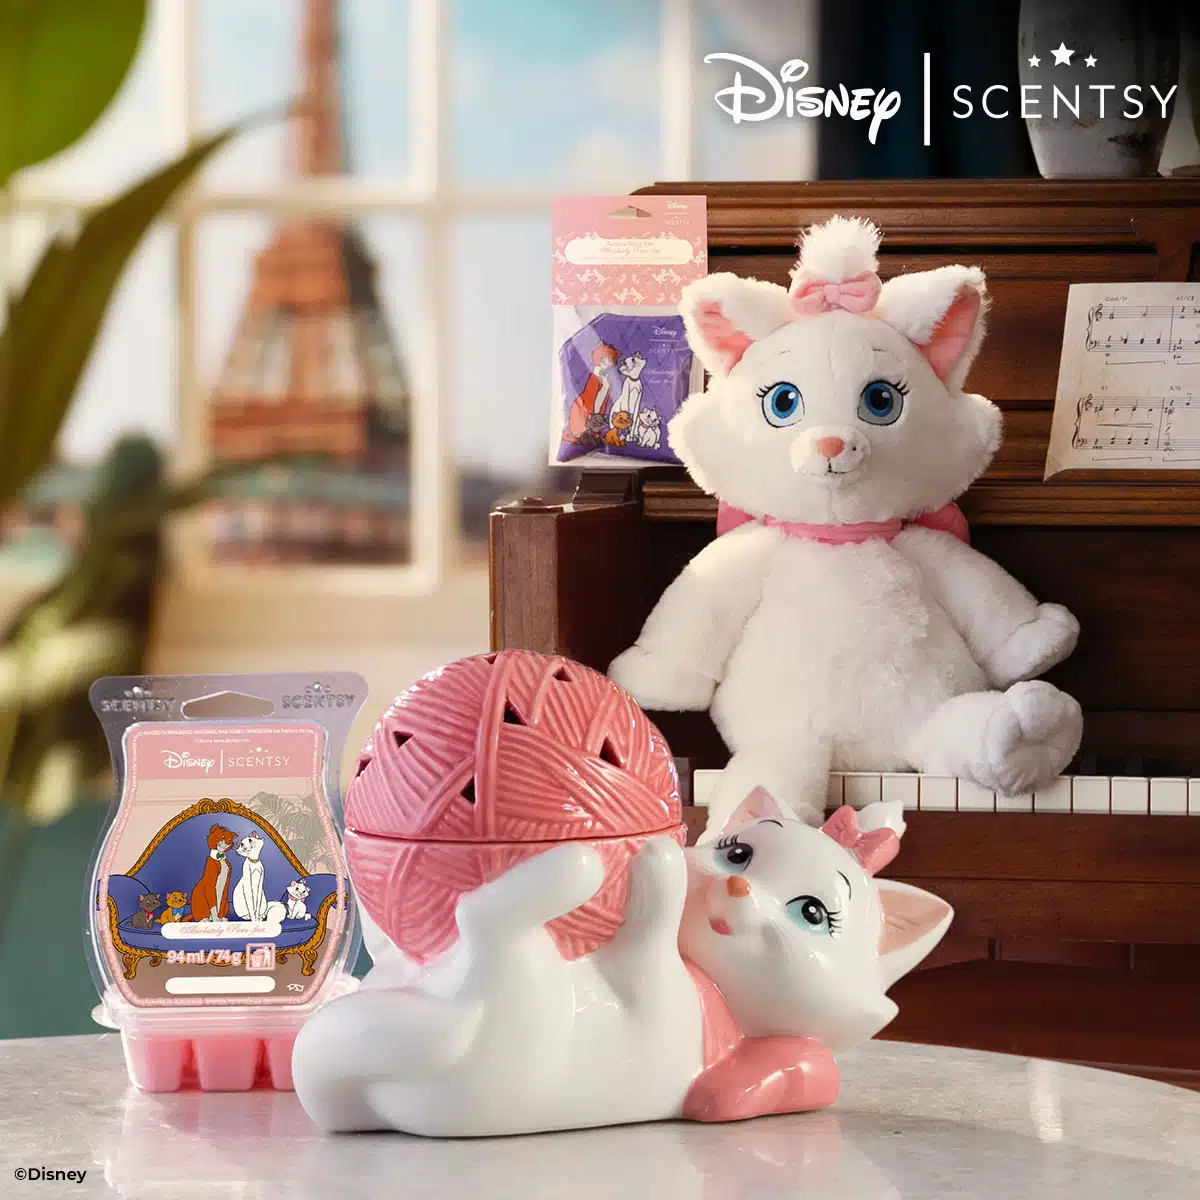 A purr-fect Scentsy collection inspired by Disney’s The Aristocats